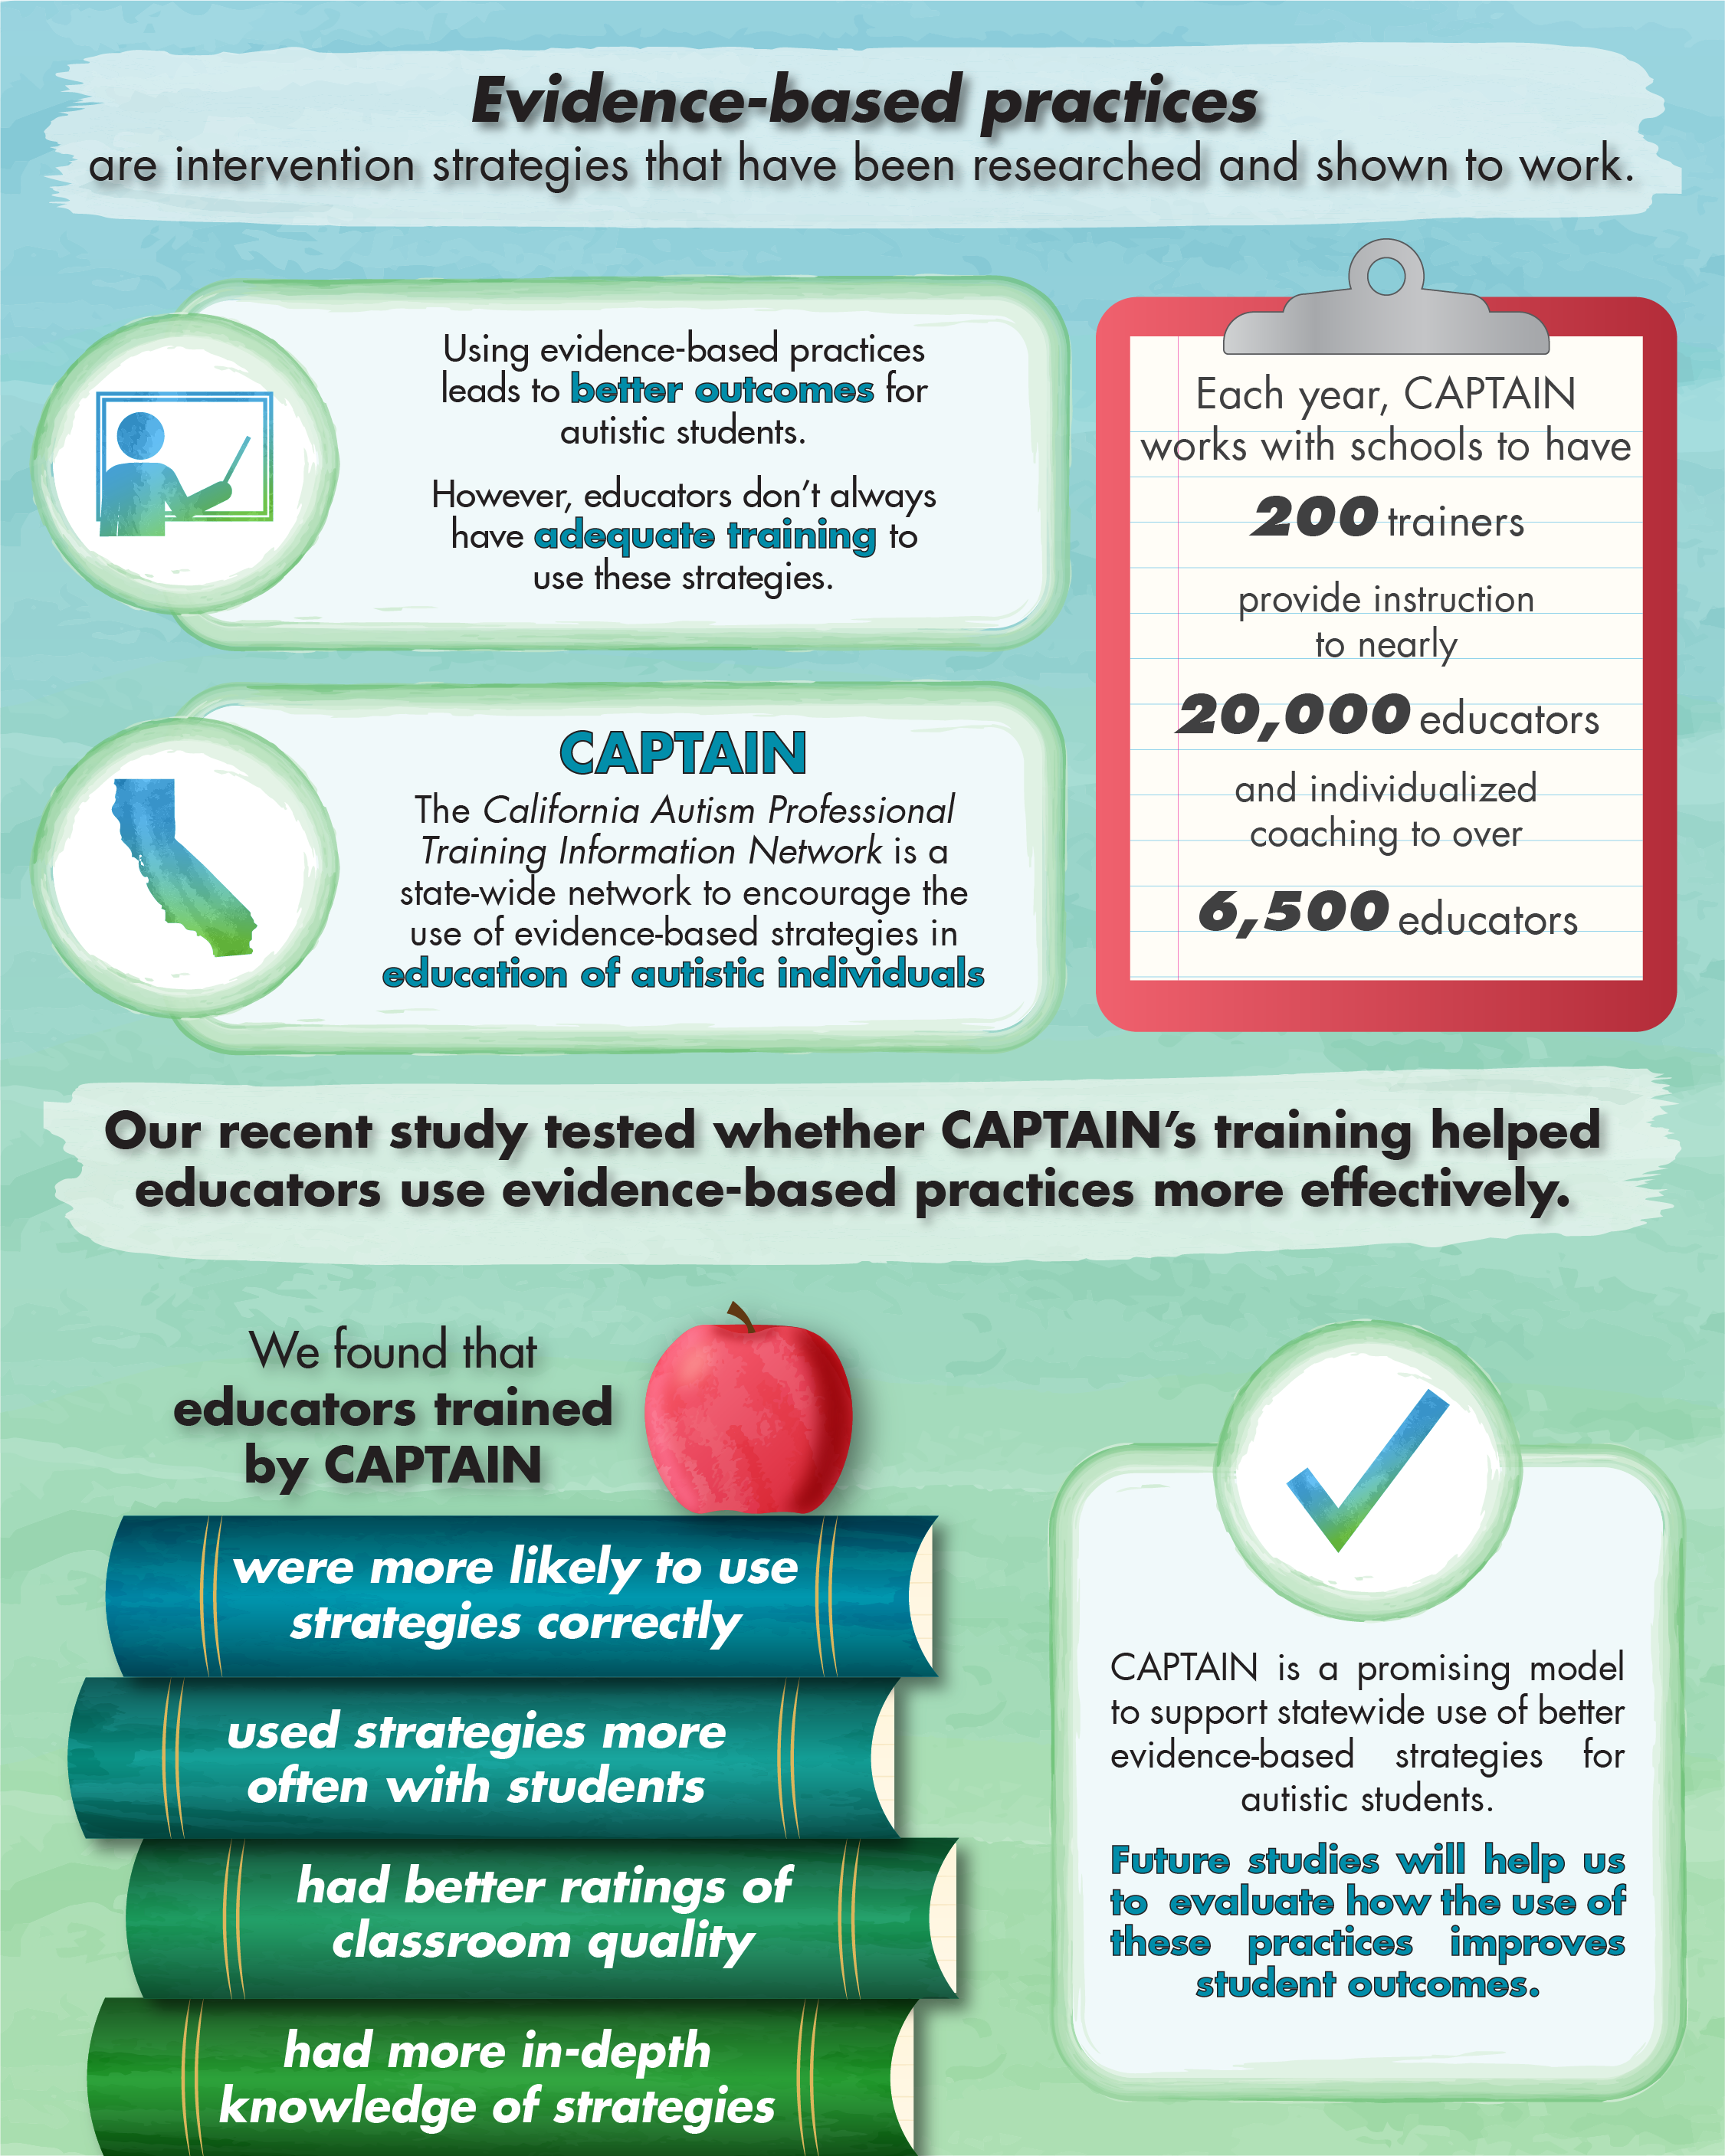 infographic explains the benefits of evidence-based practices and the successes of CAPTAIN.  Educators who received CAPTAIN training  reported better attitudes toward using evidence-based practices, were more likely to use the strategies correctly and used them more often with students. They had more in-depth knowledge of their primary intervention strategy and better ratings of classroom quality than educators who did not get CAPTAIN training